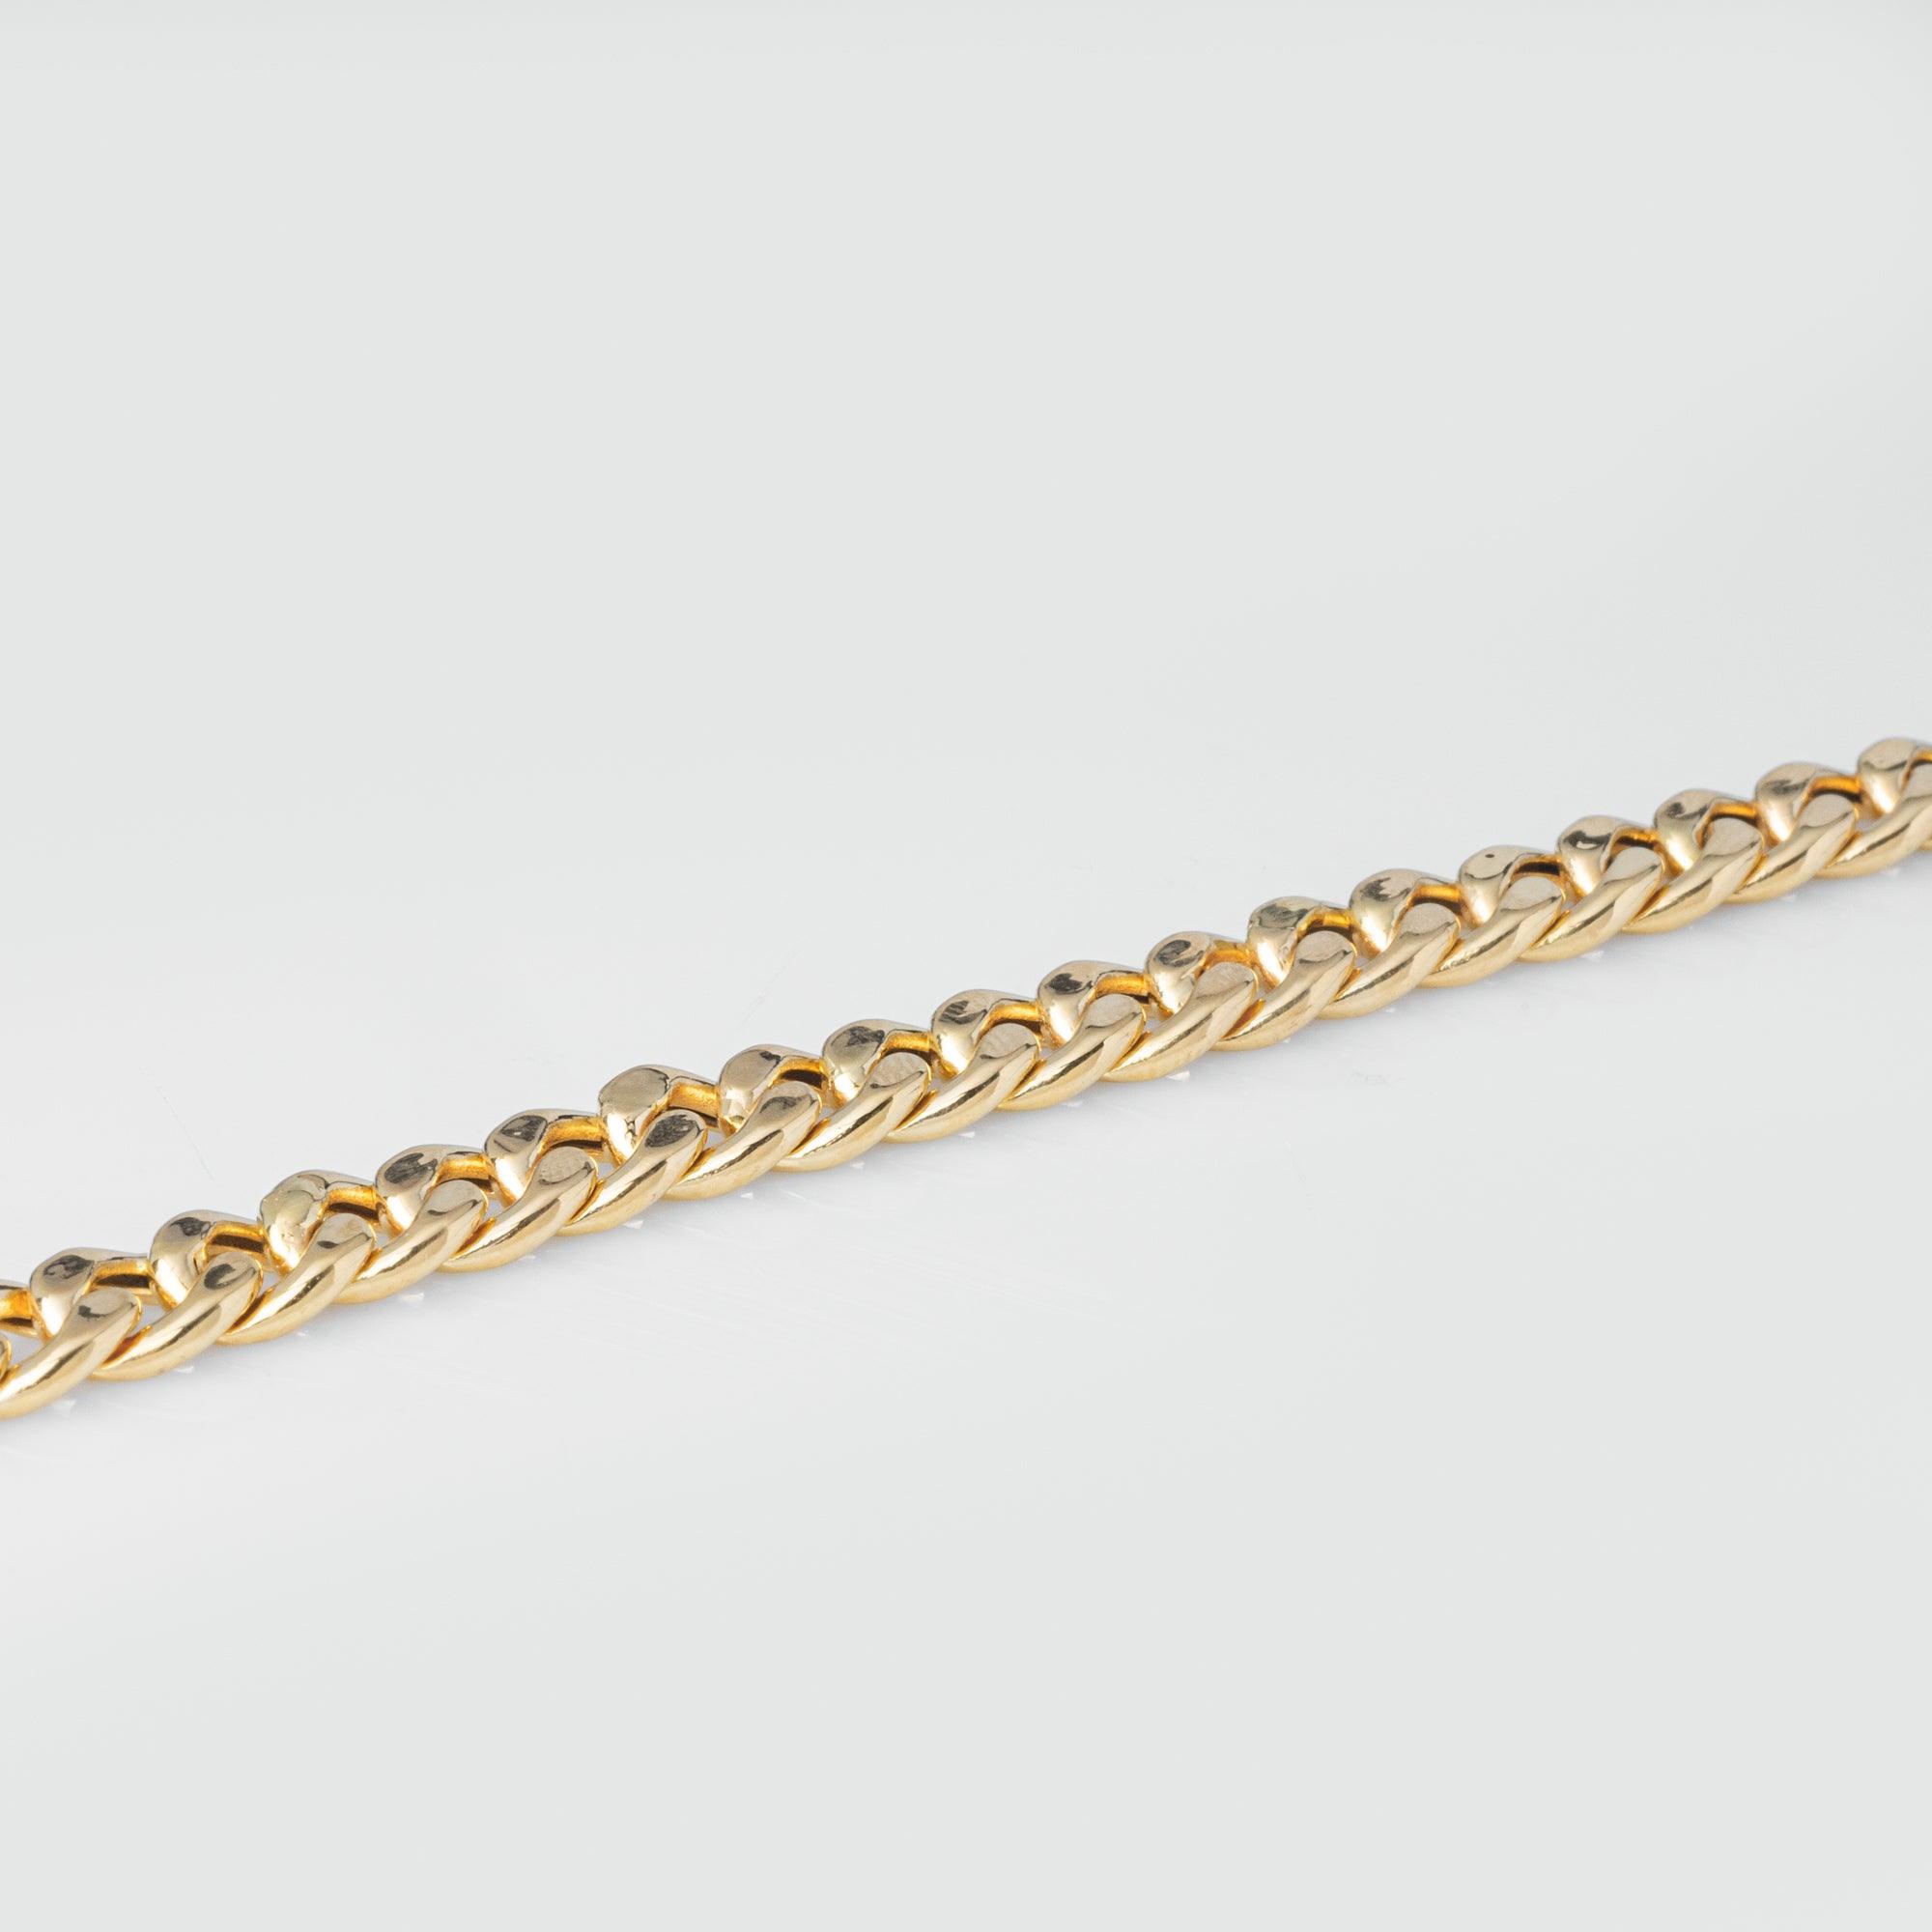 22ct Gold Curb Link Gents Bracelet with Mirror Finish fitted with a Lobster Clasp (15.4g) GBR-8044